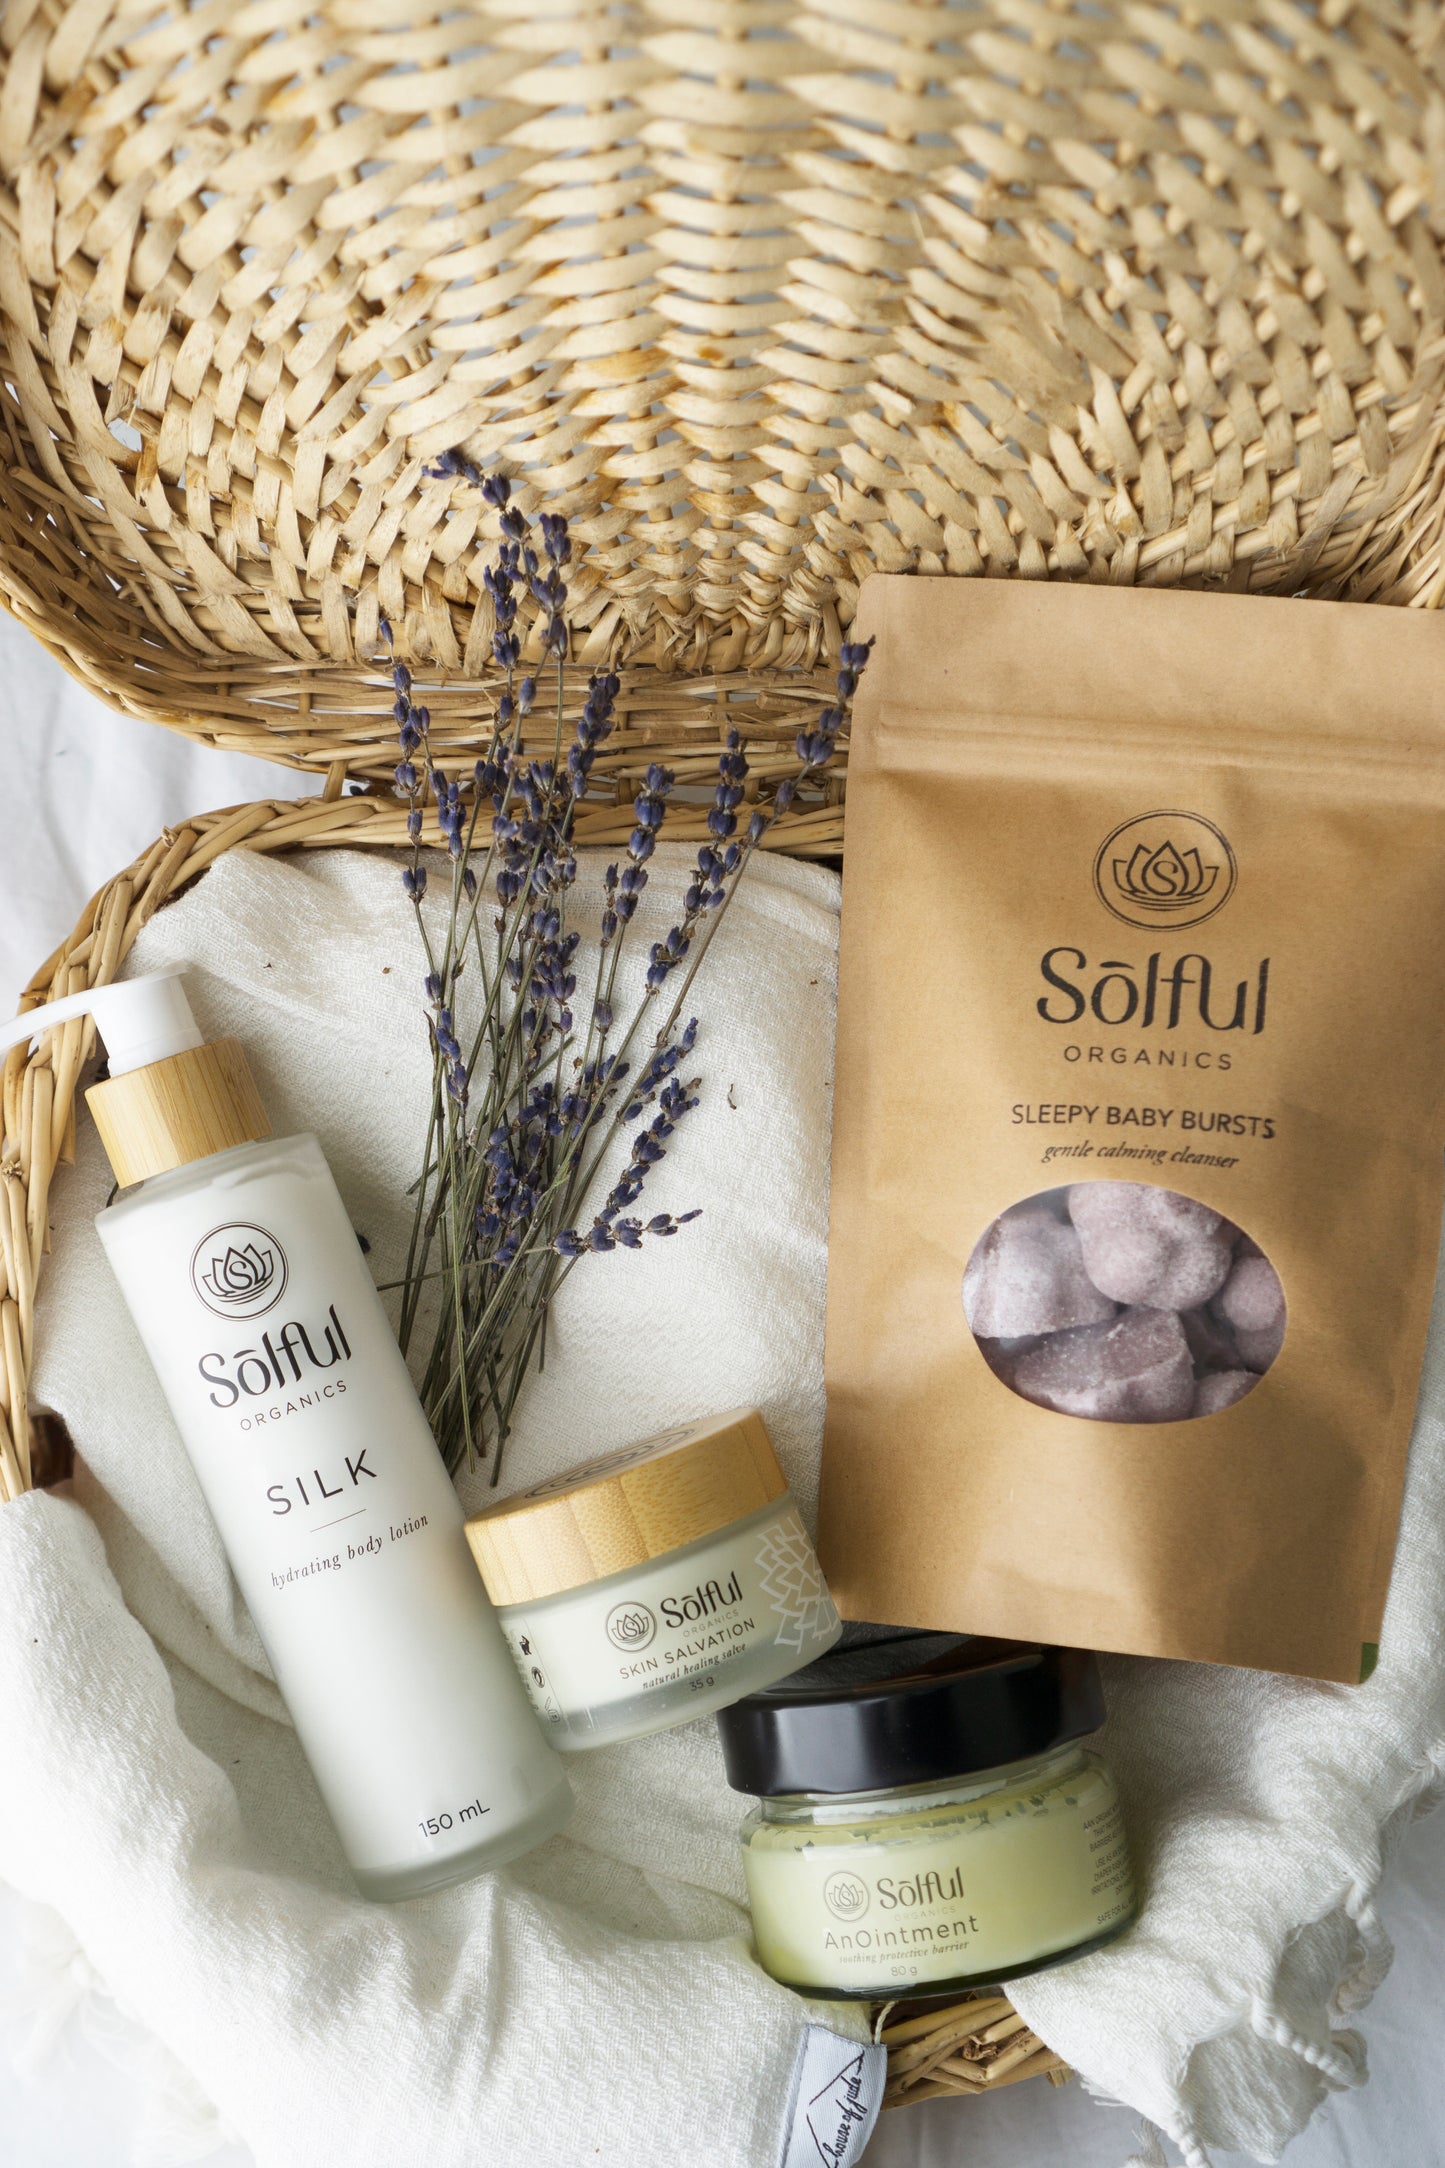 Solful organics ultimate baby set incudes silk, anointment, skin salvation and sleepy baby bursts.